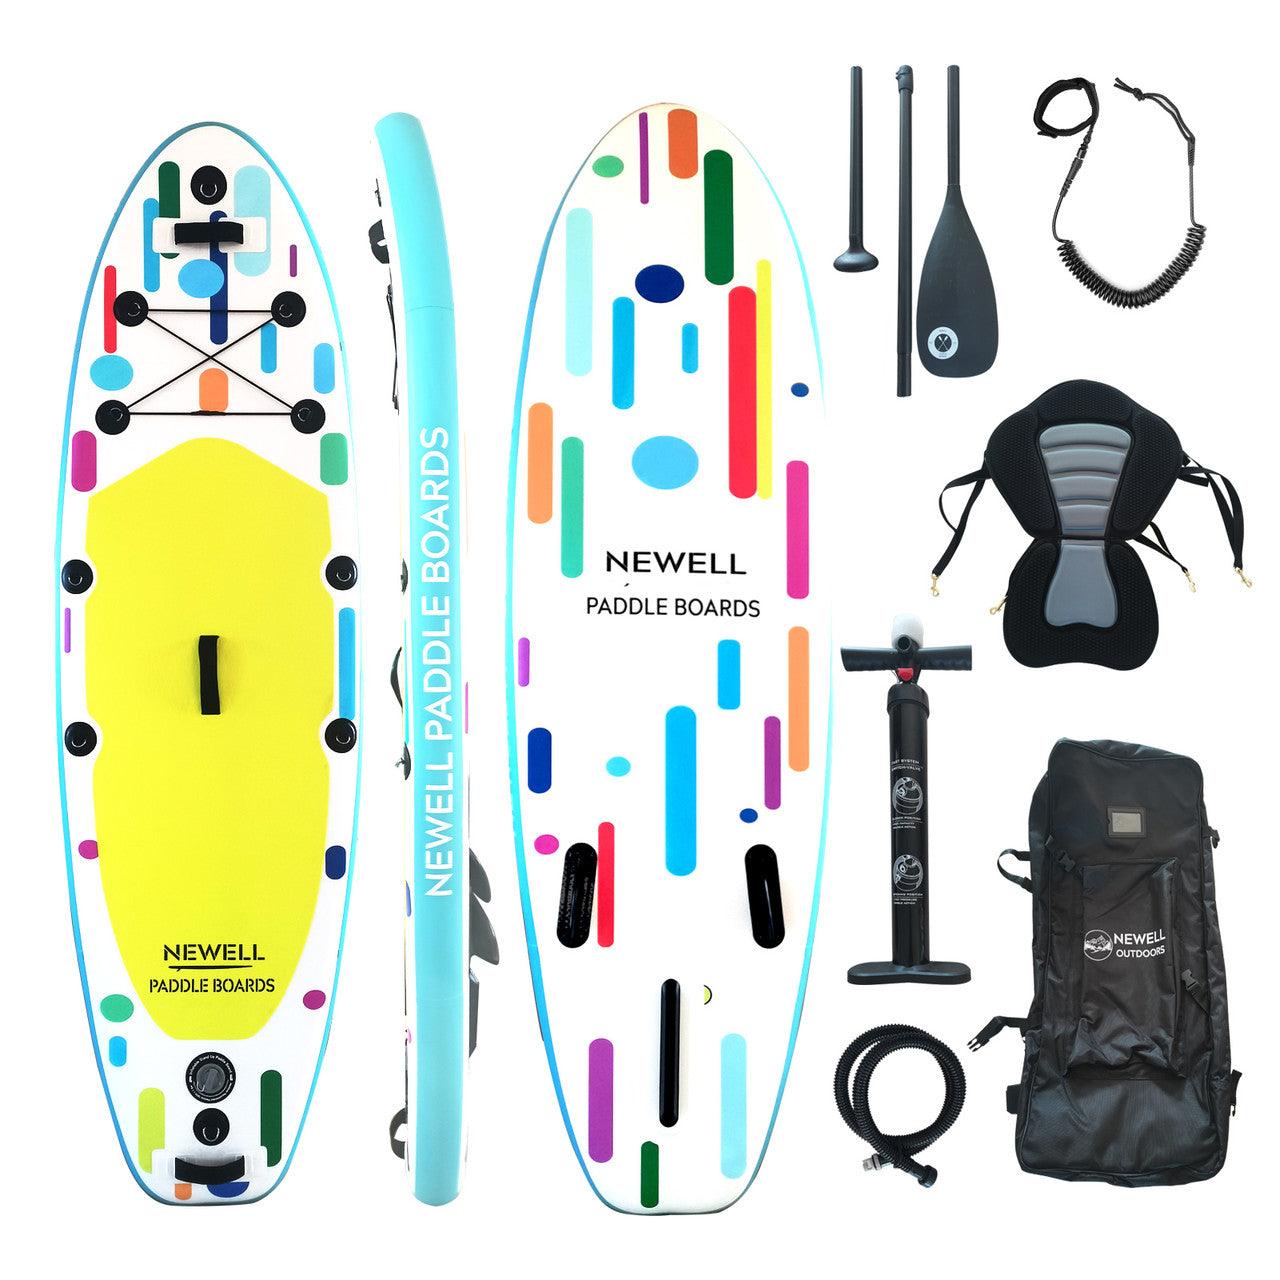 The Offspring paddleboard for kids by Newell Outdoors.